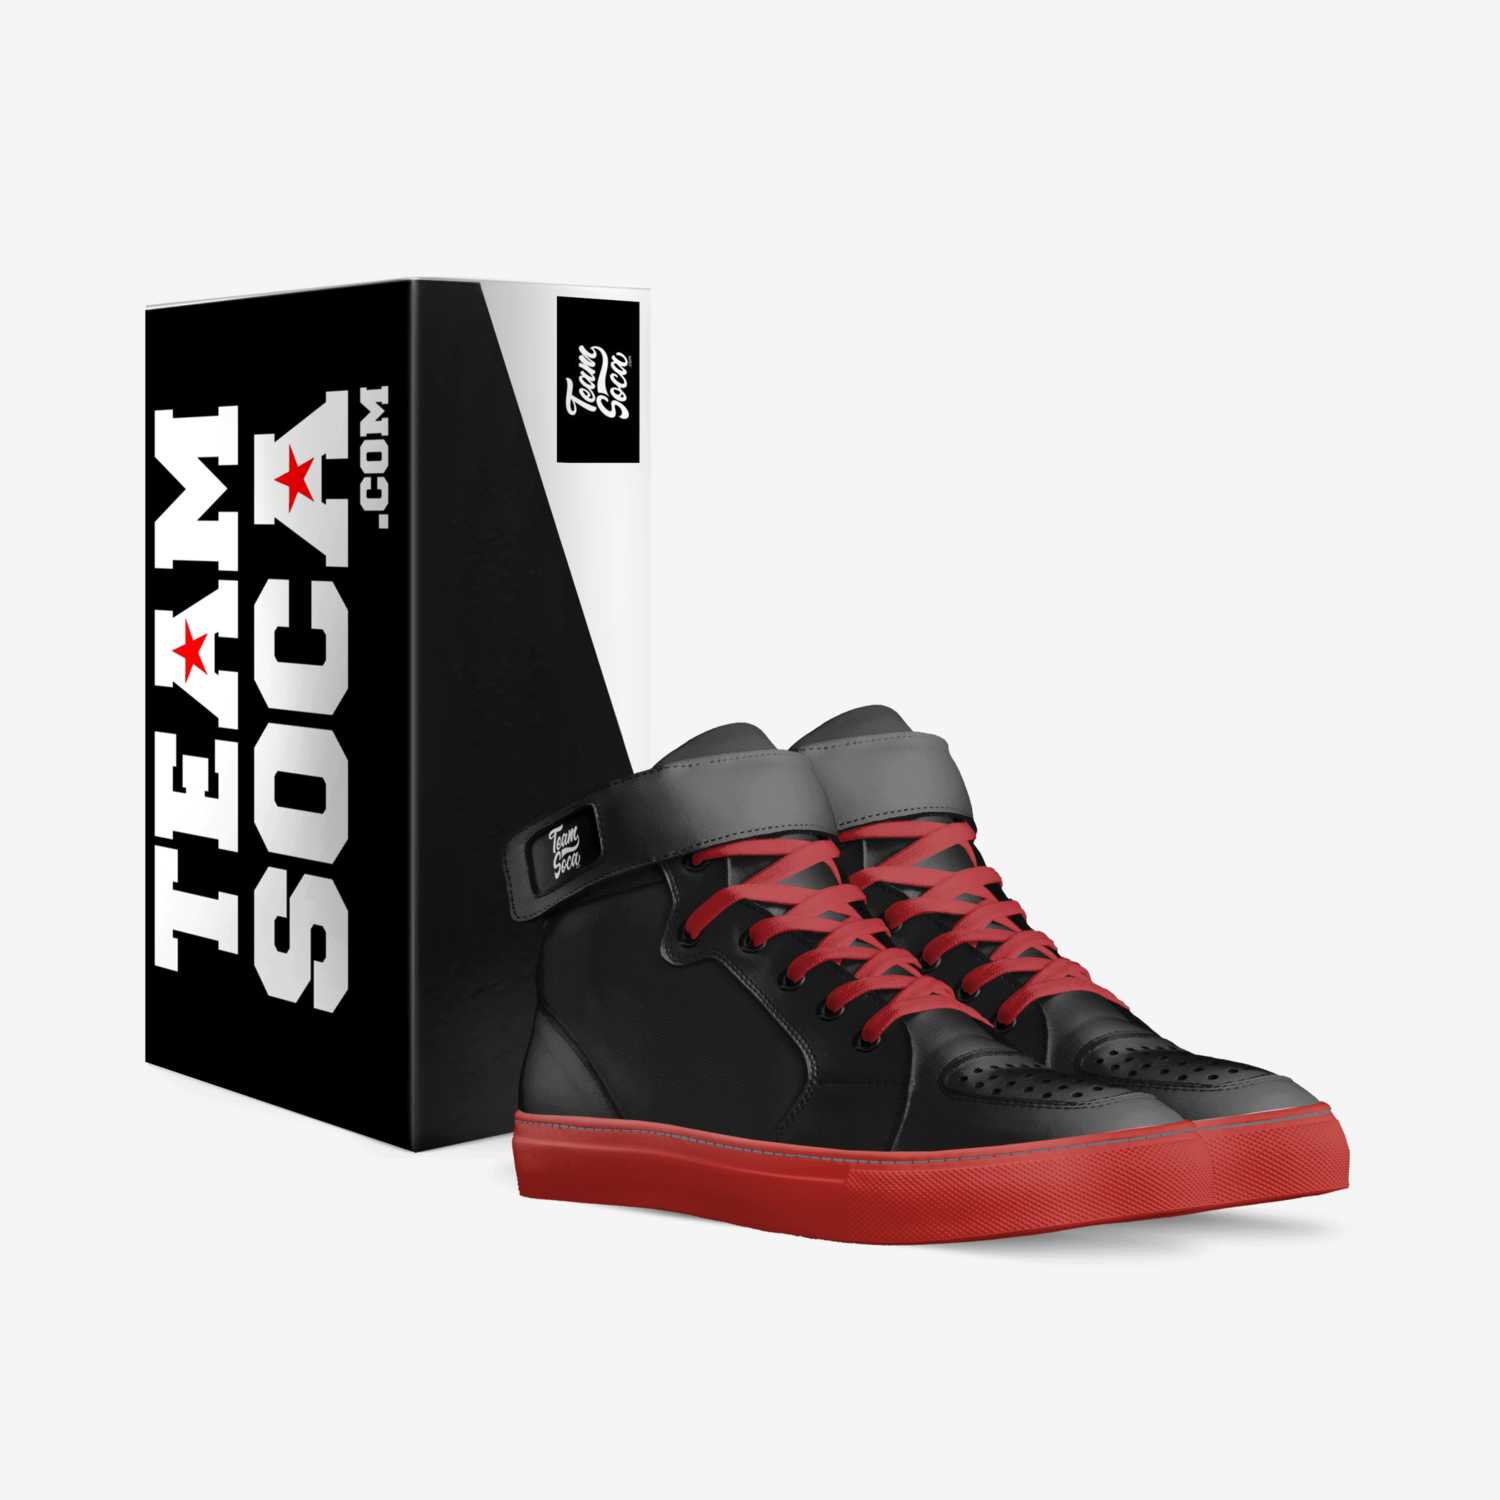 Soca custom made in Italy shoes by Team Soca | Box view